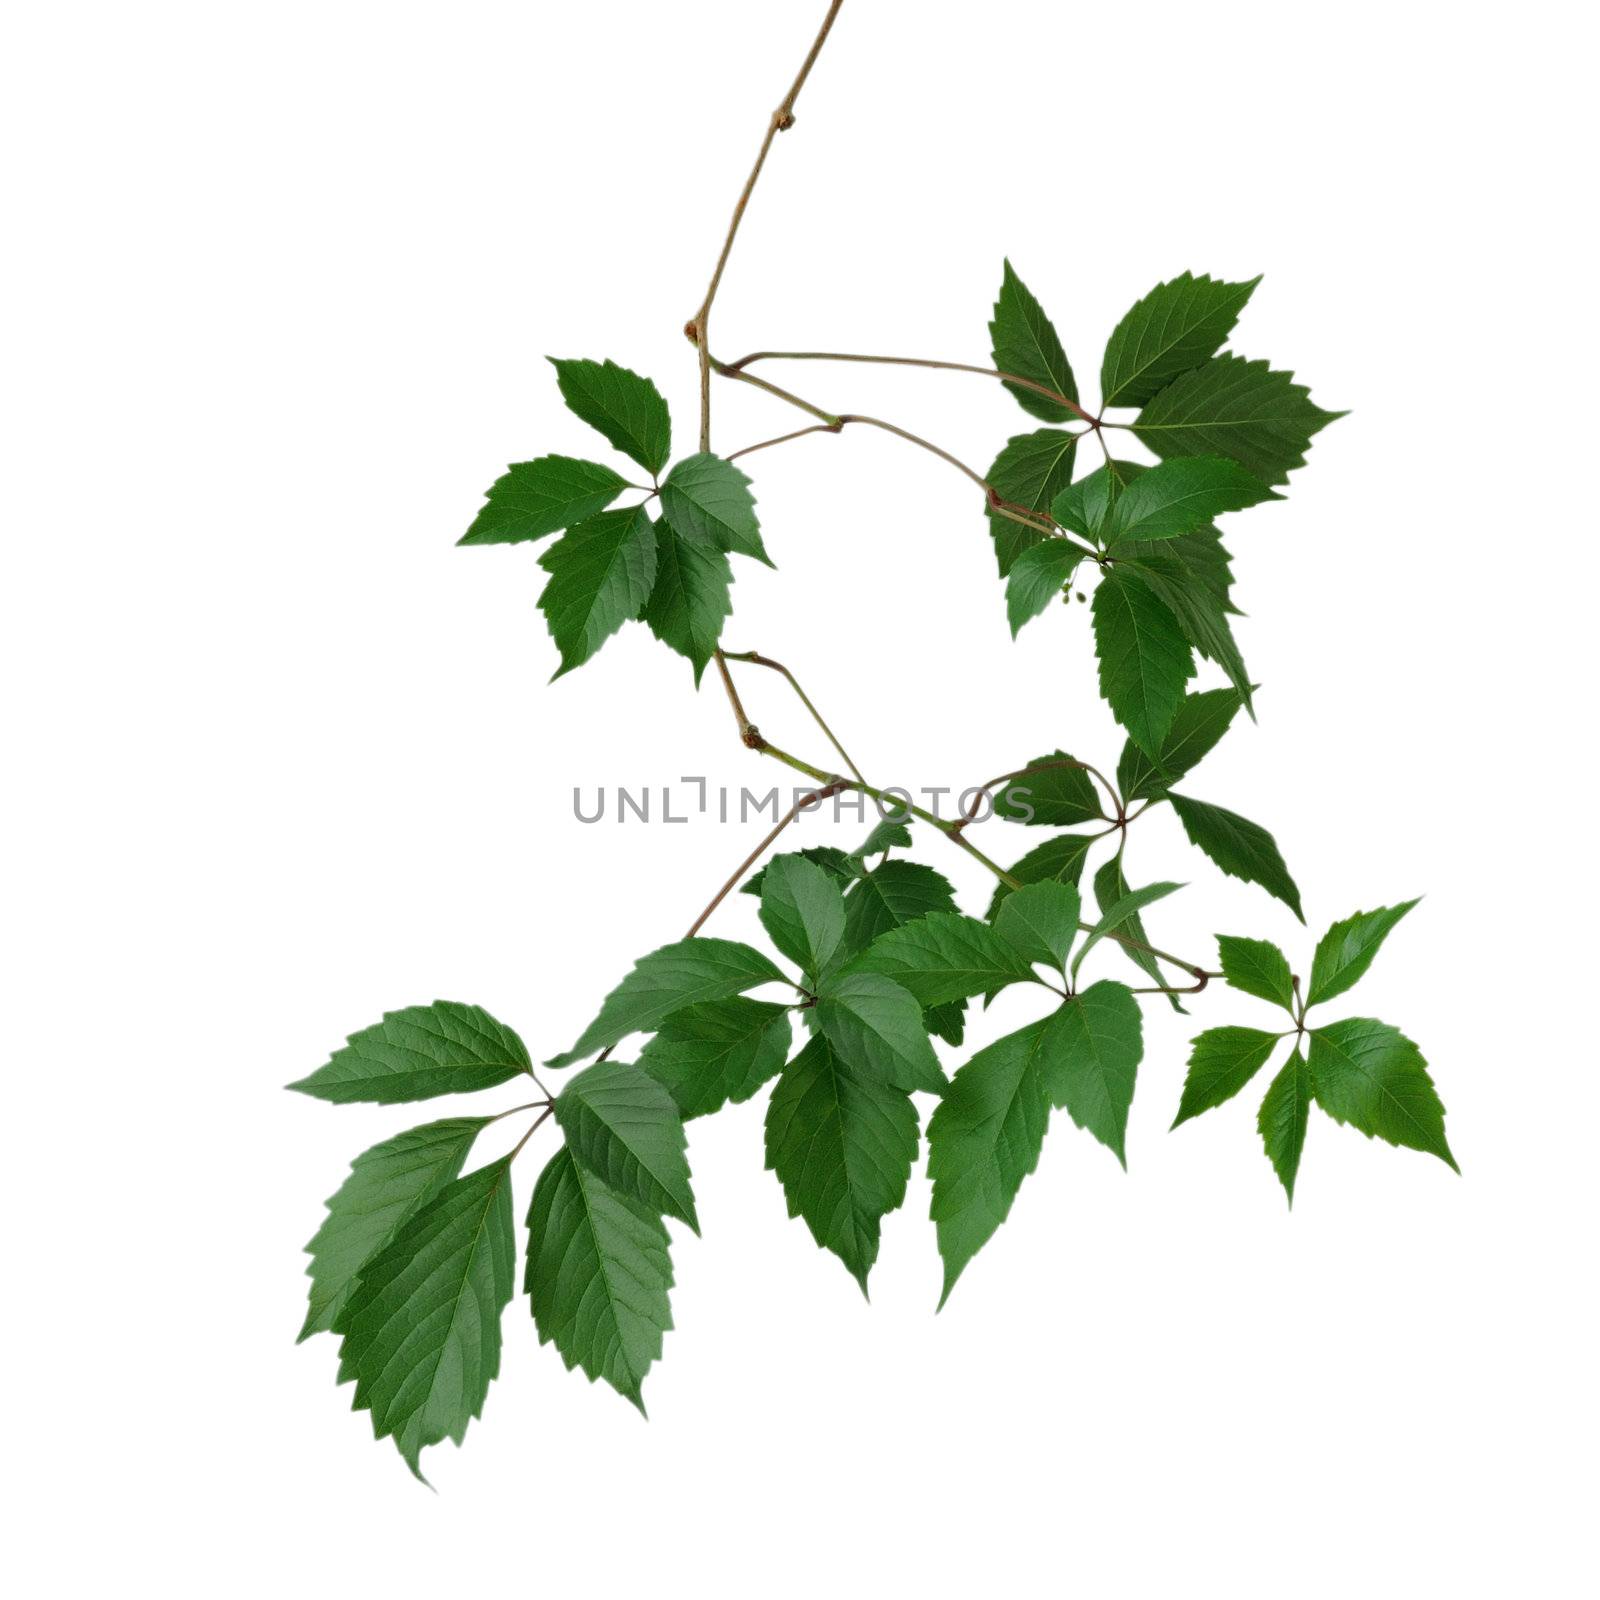 The branch with leaves of wild grapes on a white background